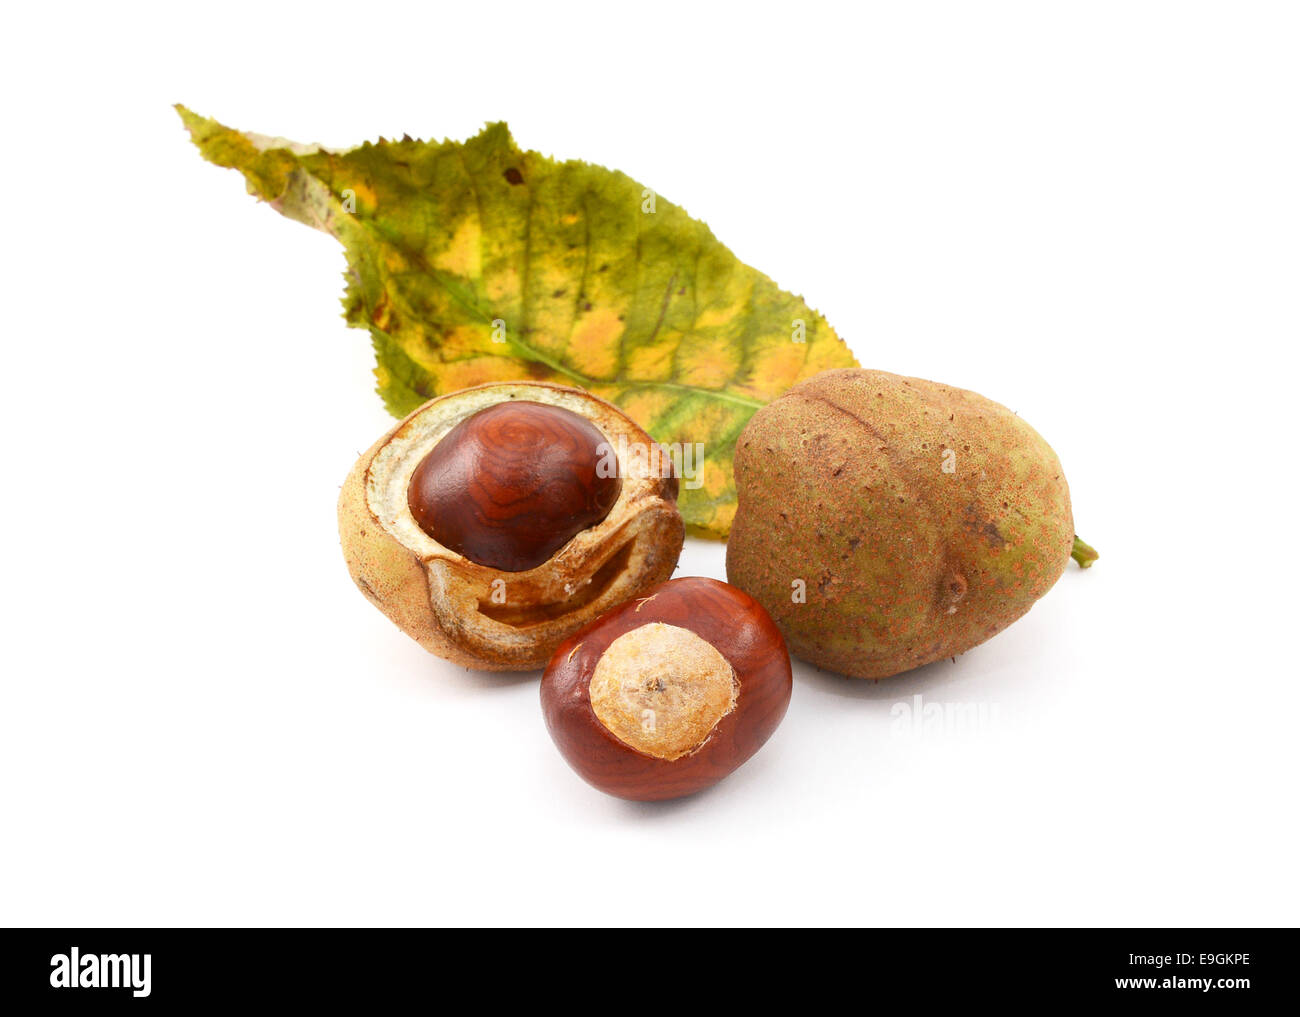 Conkers and smooth seed cases with the leaf of a red horse chestnut tree, isolated on a white background Stock Photo